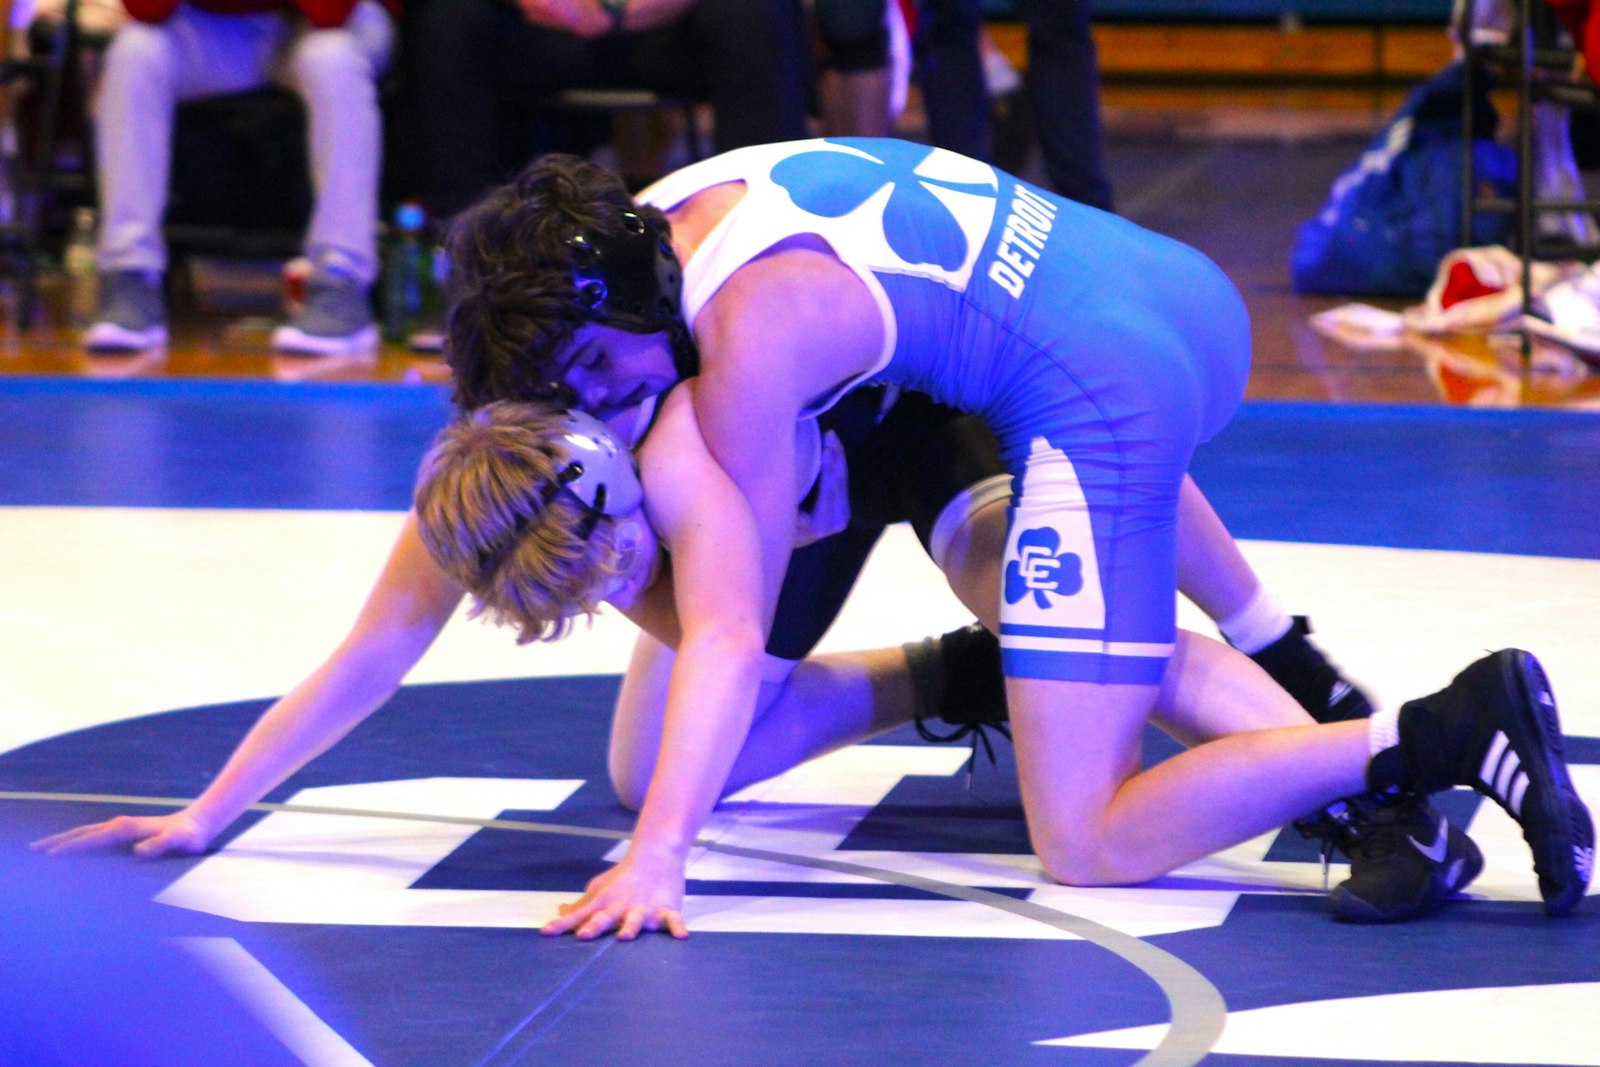 Catholic Central’s Grayson Fuchs rides Lowell’s Connor Cichocki on the way to winning his 124-pound match, giving the Shamrocks an early 21-6 lead over the Red Arrows.